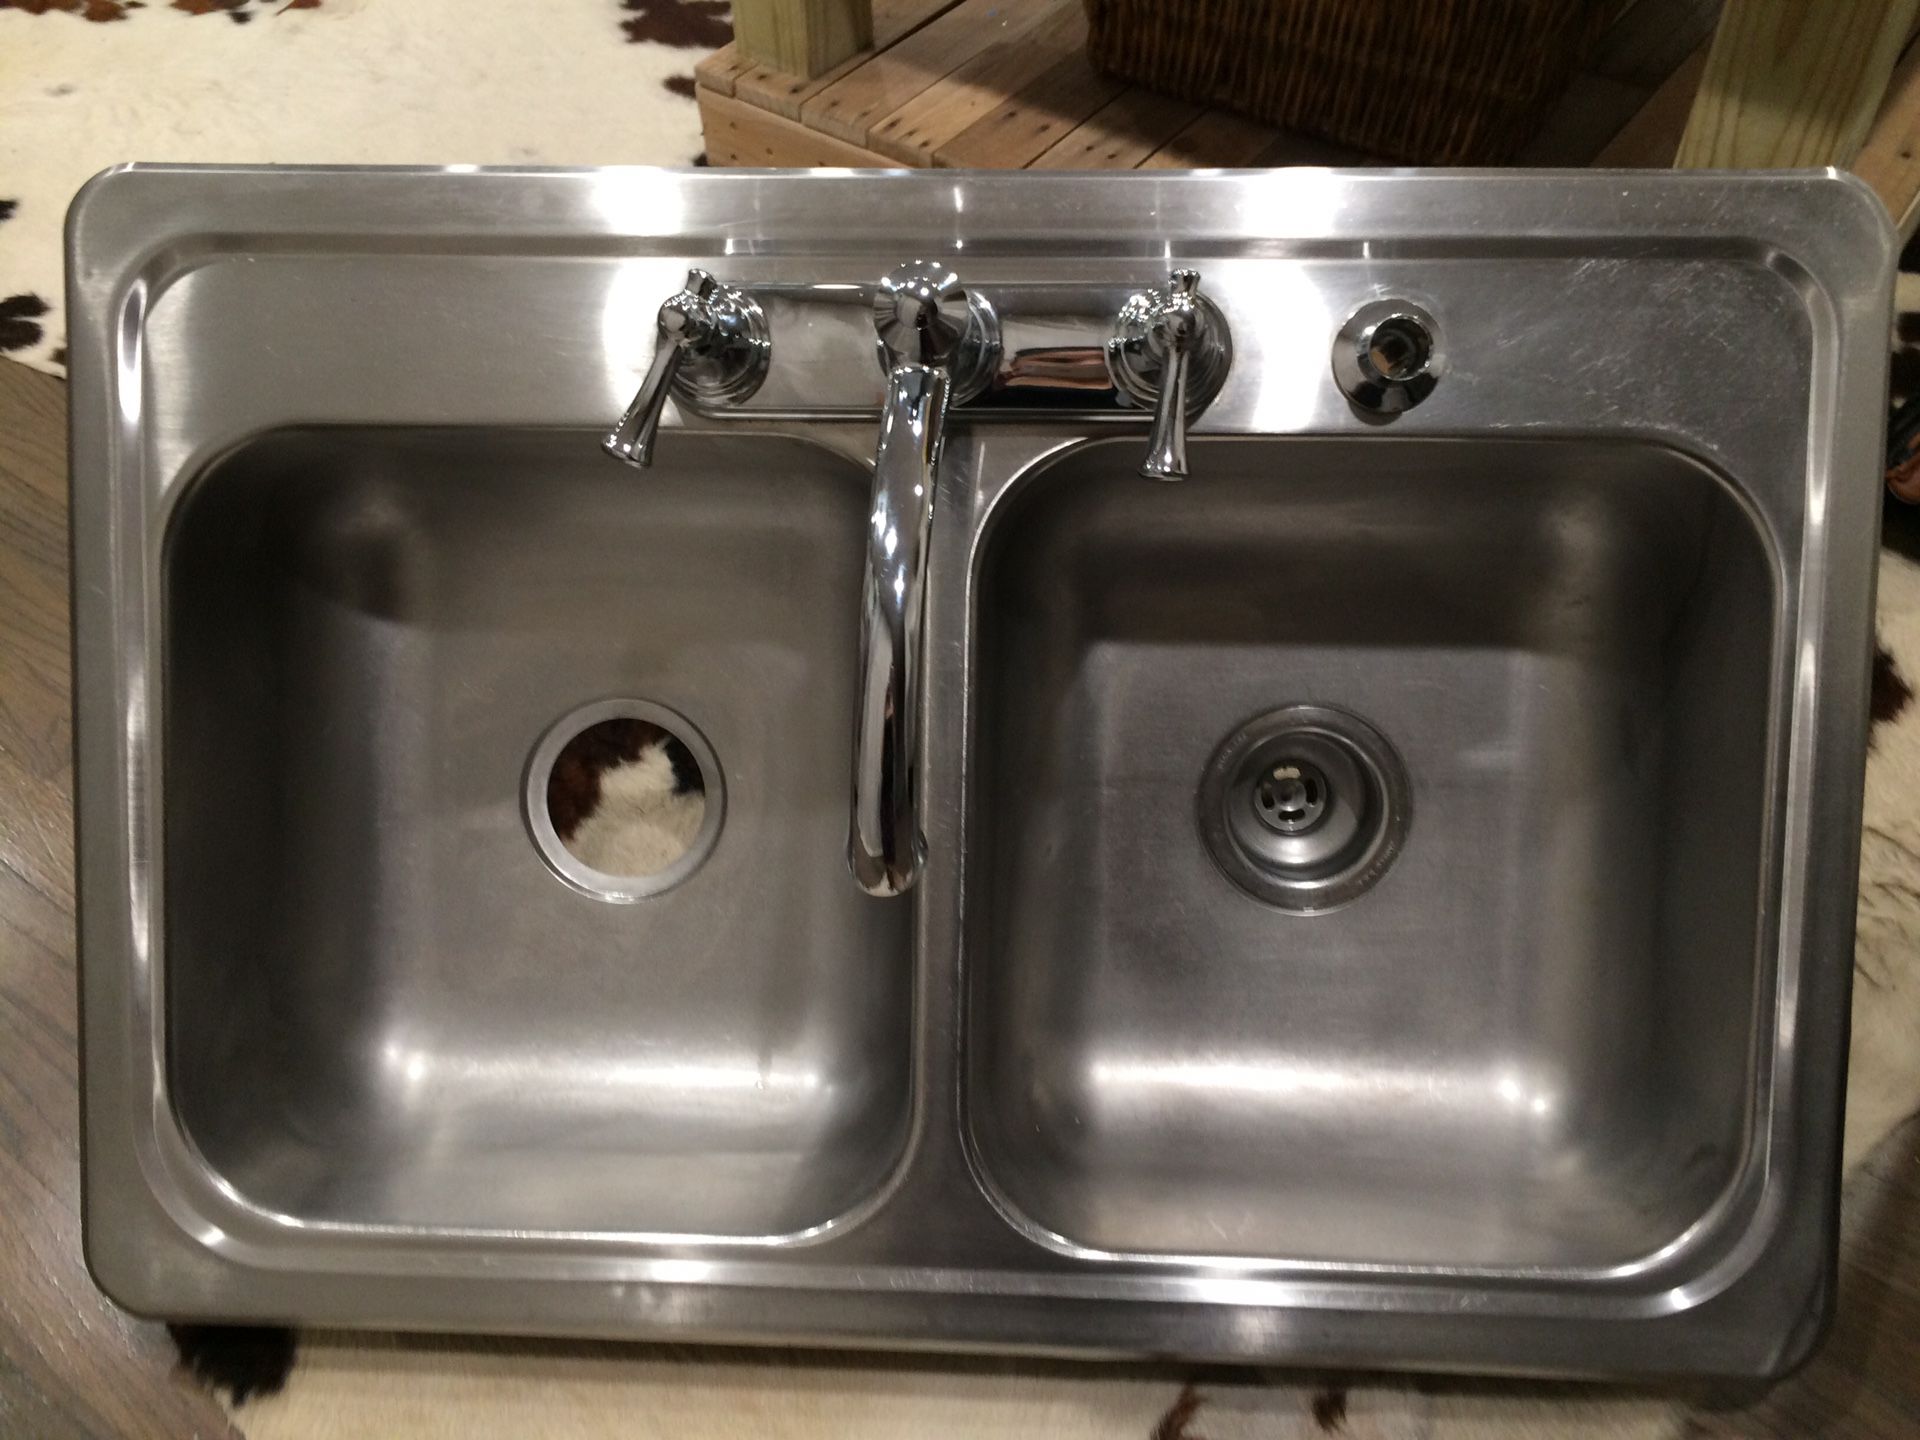 STAINLESS STEEL KITCHEN SINK WITH FAUCET. (SINK A)